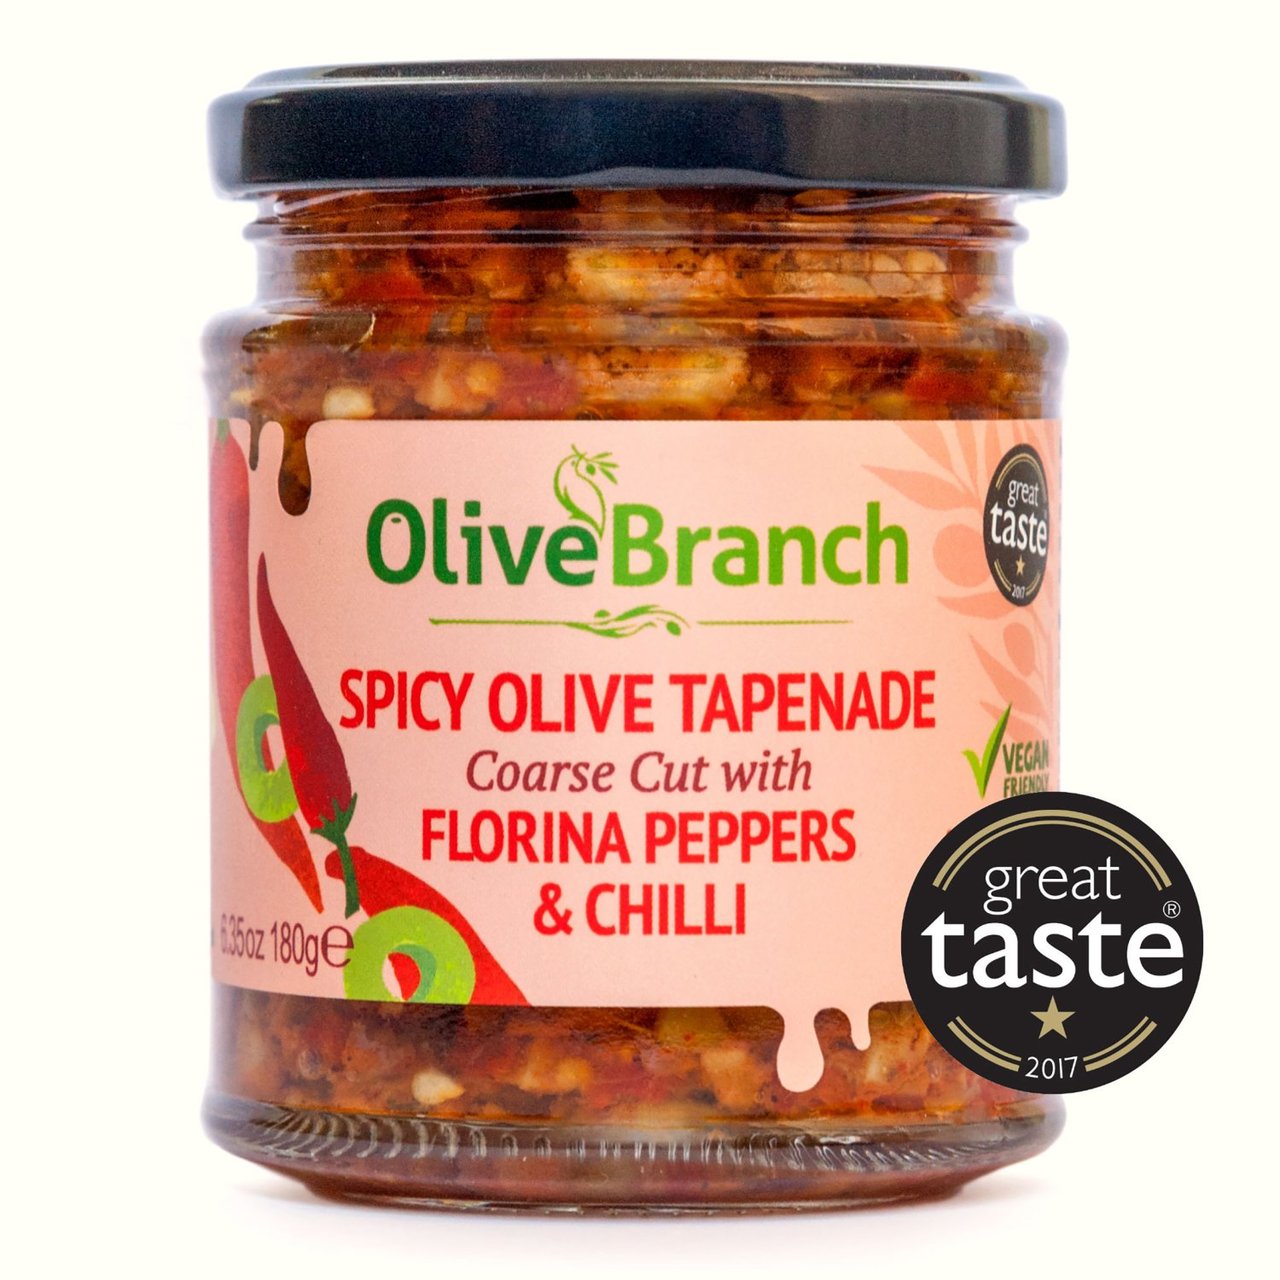 Olive Branch Olive Tapenade with Florina Peppers & Chilli